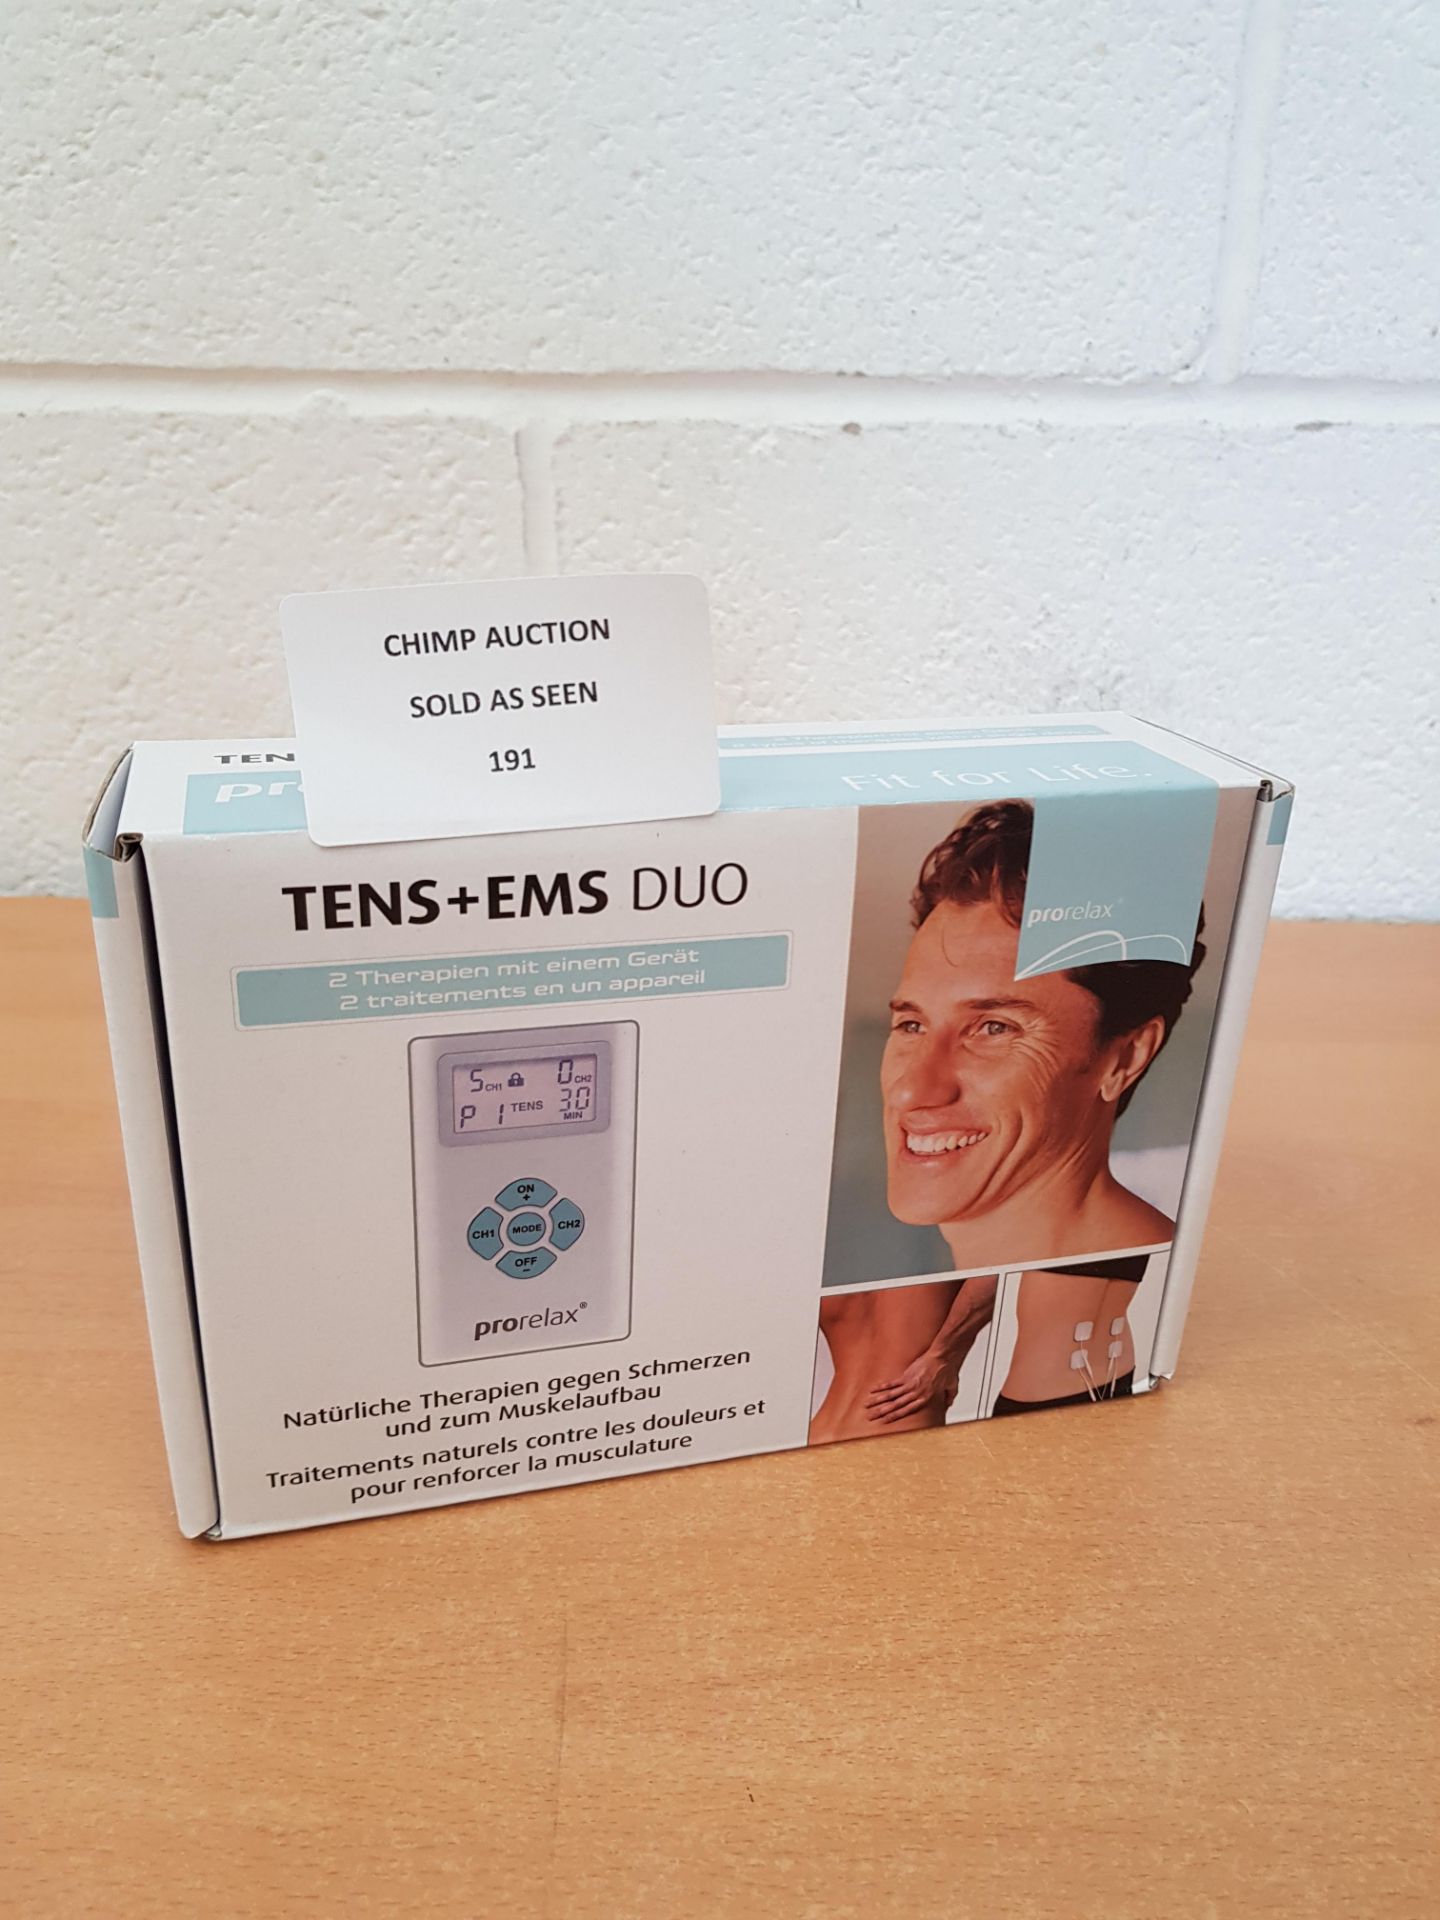 Pro Relax Tens and Ems Duo 2 -in-1 Therapies Device